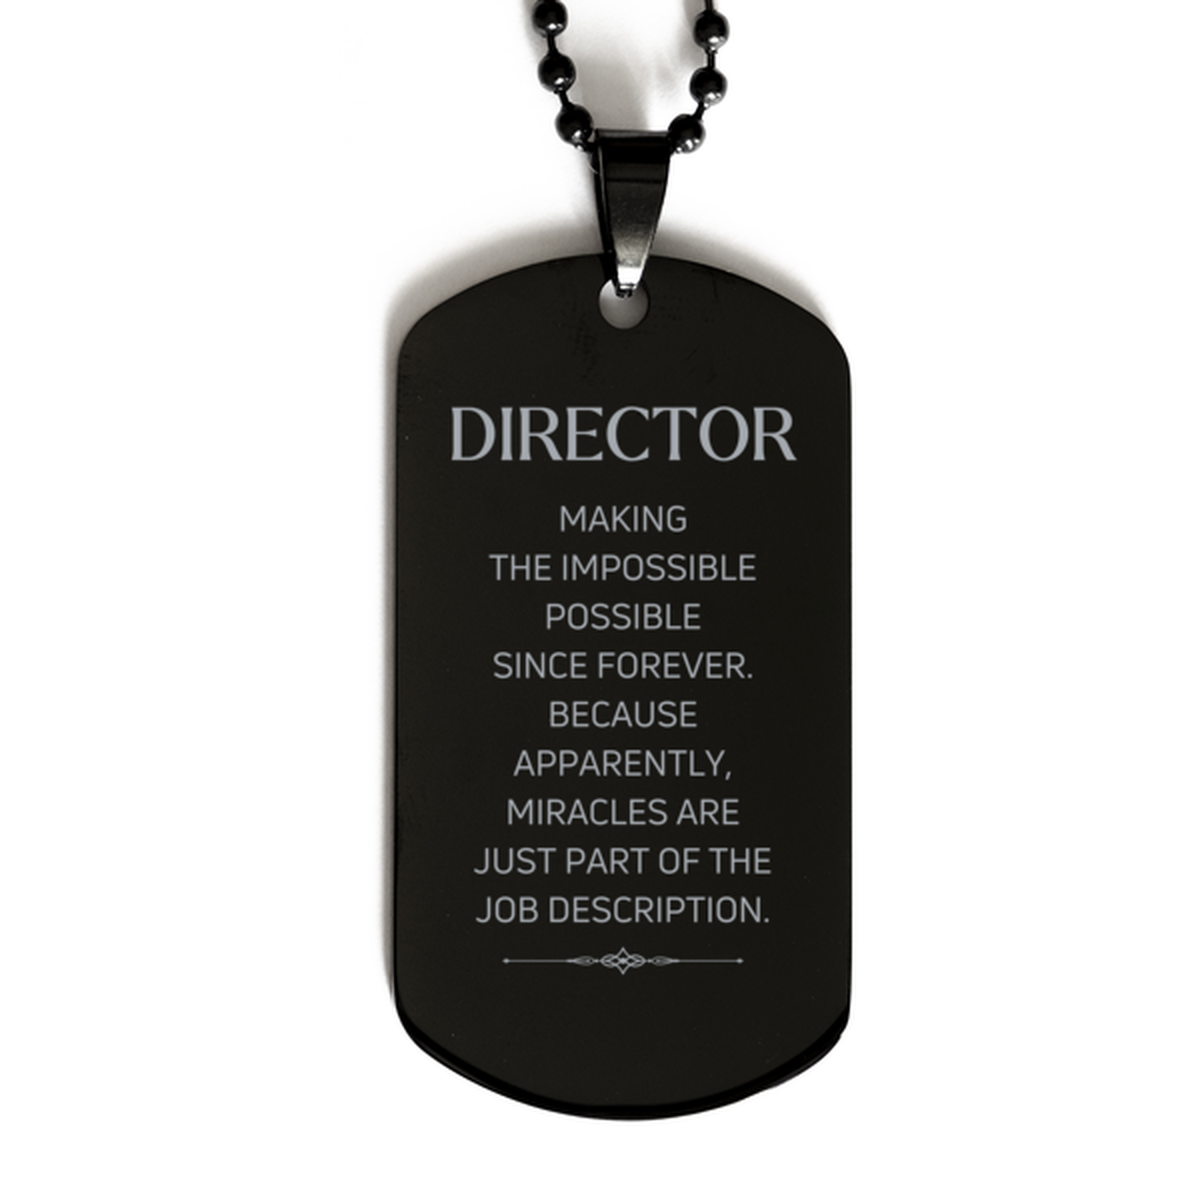 Funny Director Gifts, Miracles are just part of the job description, Inspirational Birthday Black Dog Tag For Director, Men, Women, Coworkers, Friends, Boss